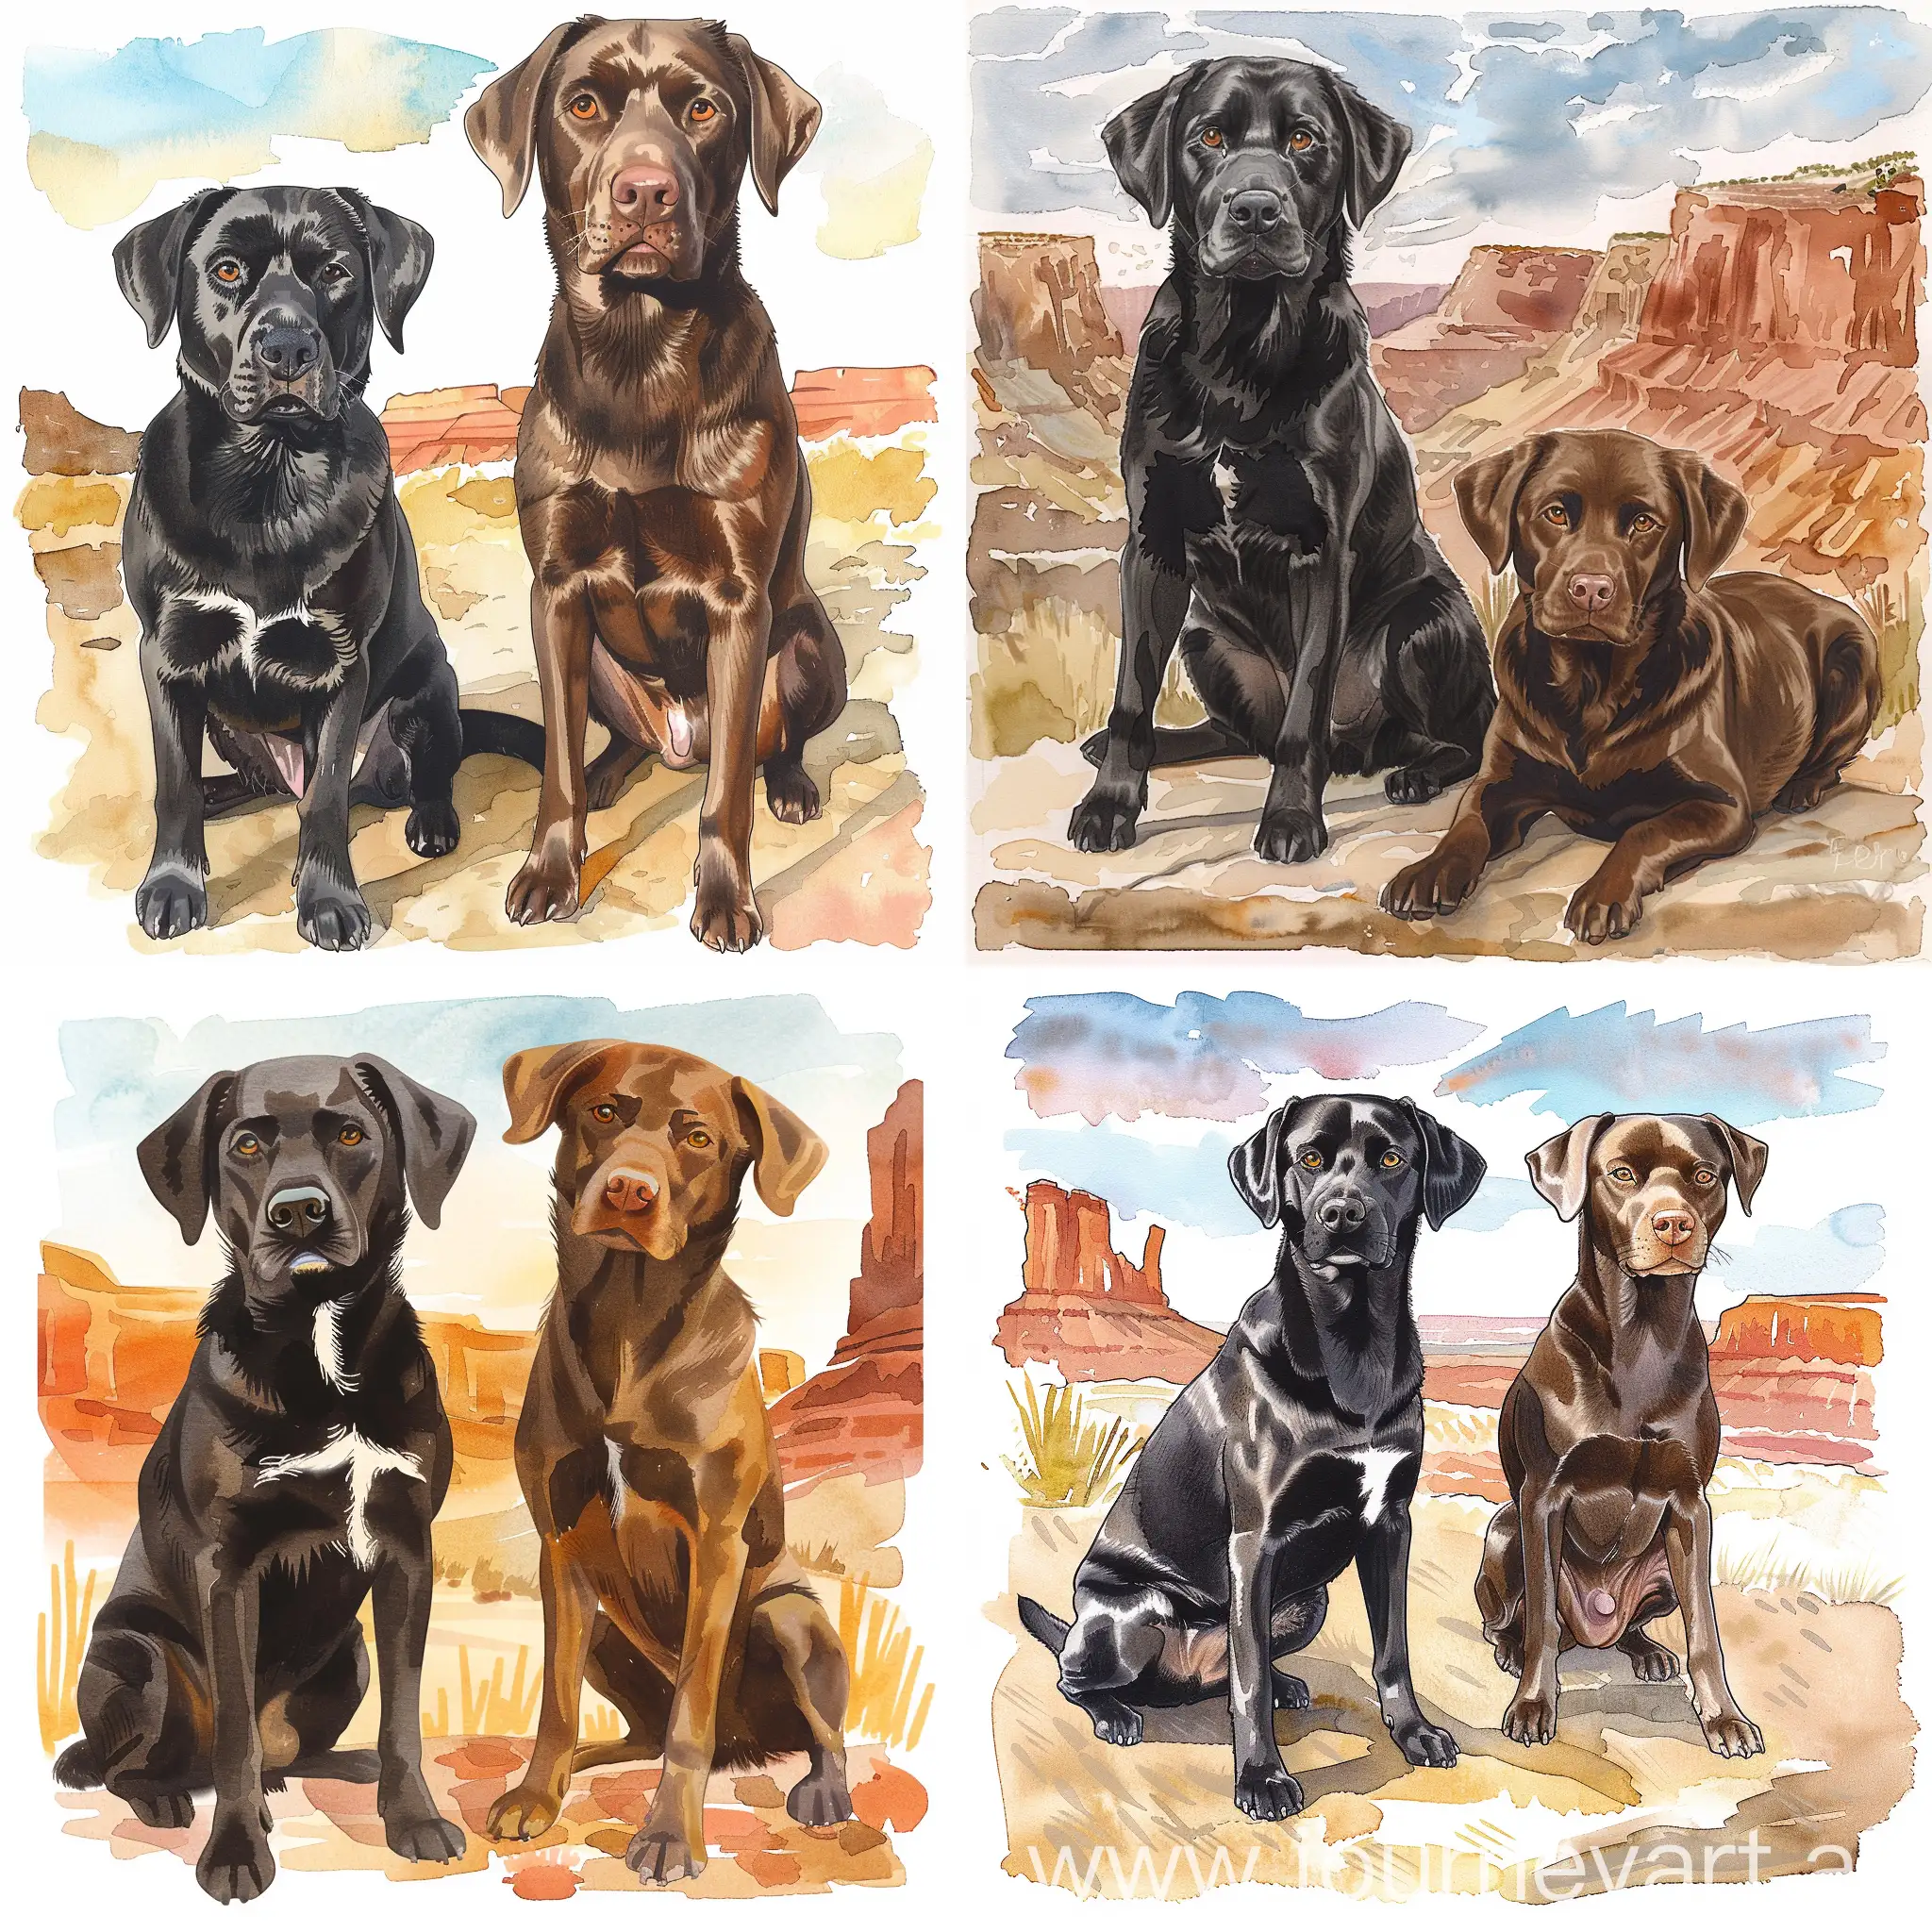 TWO medium size adorable cute friendly adult dogs. cartoon. soft. rustic
1 dog black Labrador collie female mix chubby longer hair  black small WHITE on chest. 

1 dog chocolate brown male spaniel Labrador thinner mix tiny smaller WHITE patch chest. 

Watercolor. art.  adventure dogs. more cartoon. children's book. grand canyons. desert